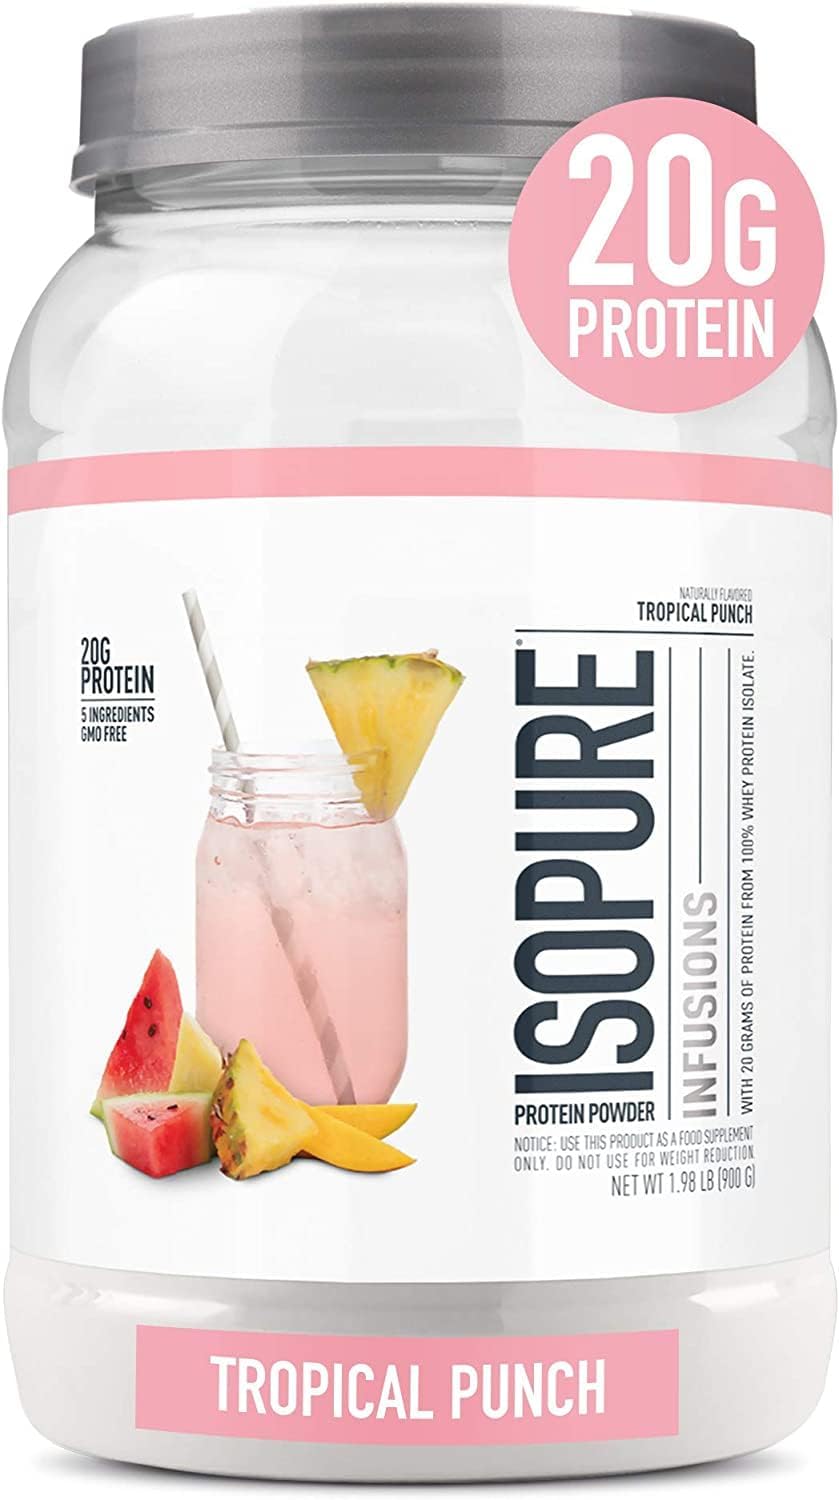 Isopure Protein Powder, Clear Whey Isolate Protein, Post Workout Recovery Drink Mix, Gluten Free with Zero Added Sugar, Infusions- Tropical Punch, 36 Servings